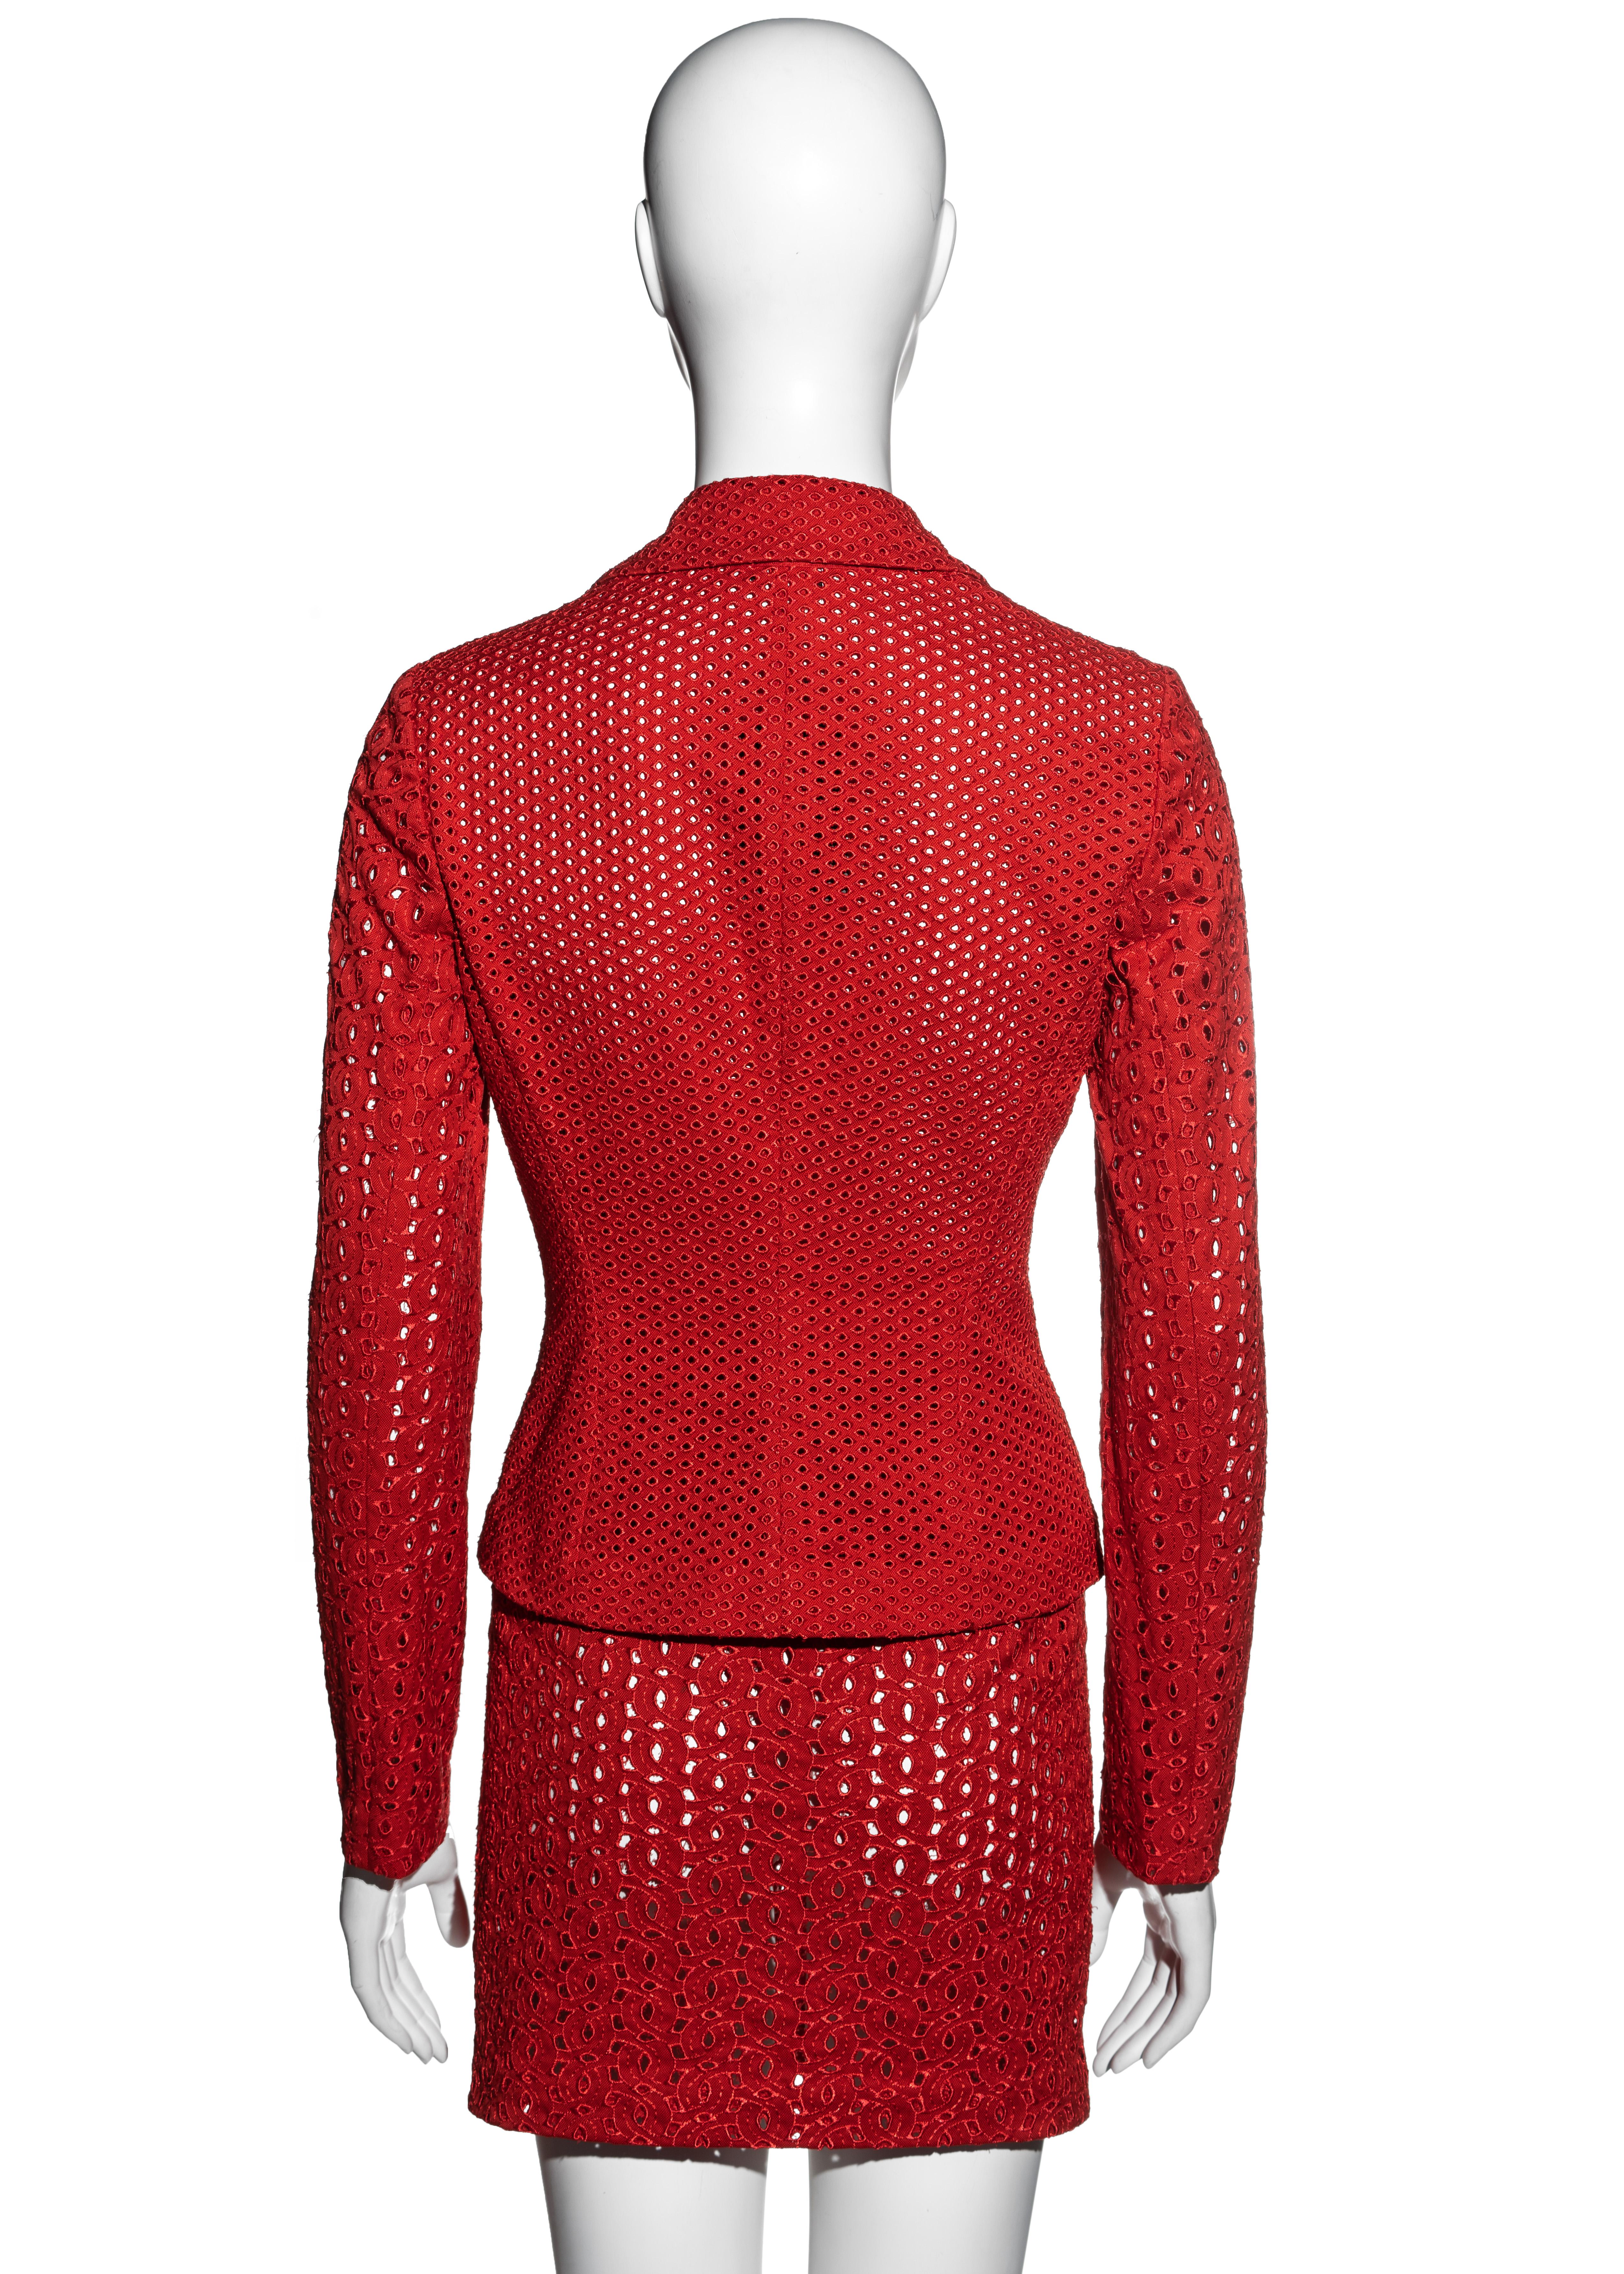 Women's Gianni Versace red cotton cutwork mini skirt suit, ss 2002 For Sale